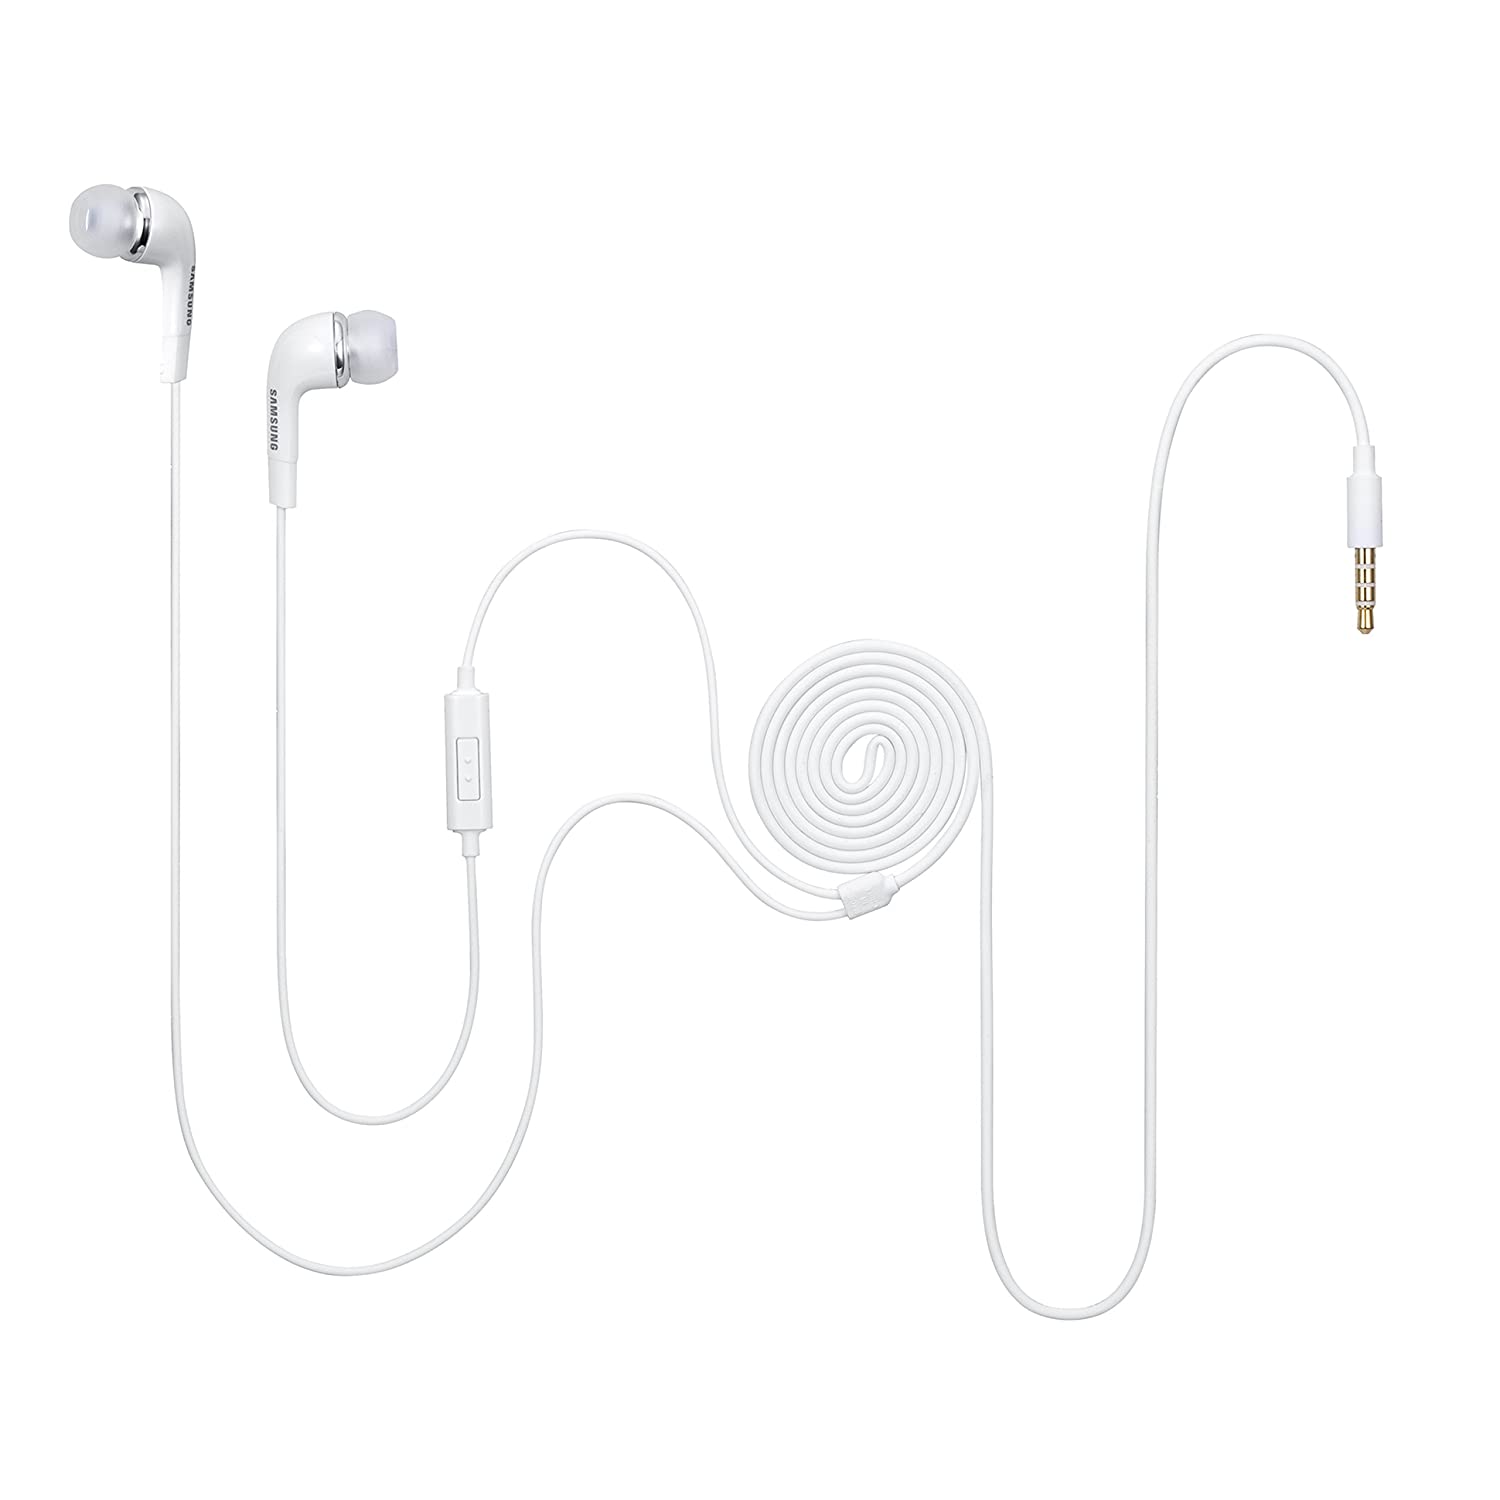 Samsung EHS64 Hands-Free Wired In Ear Earphones With Mic With Remote Note (White)